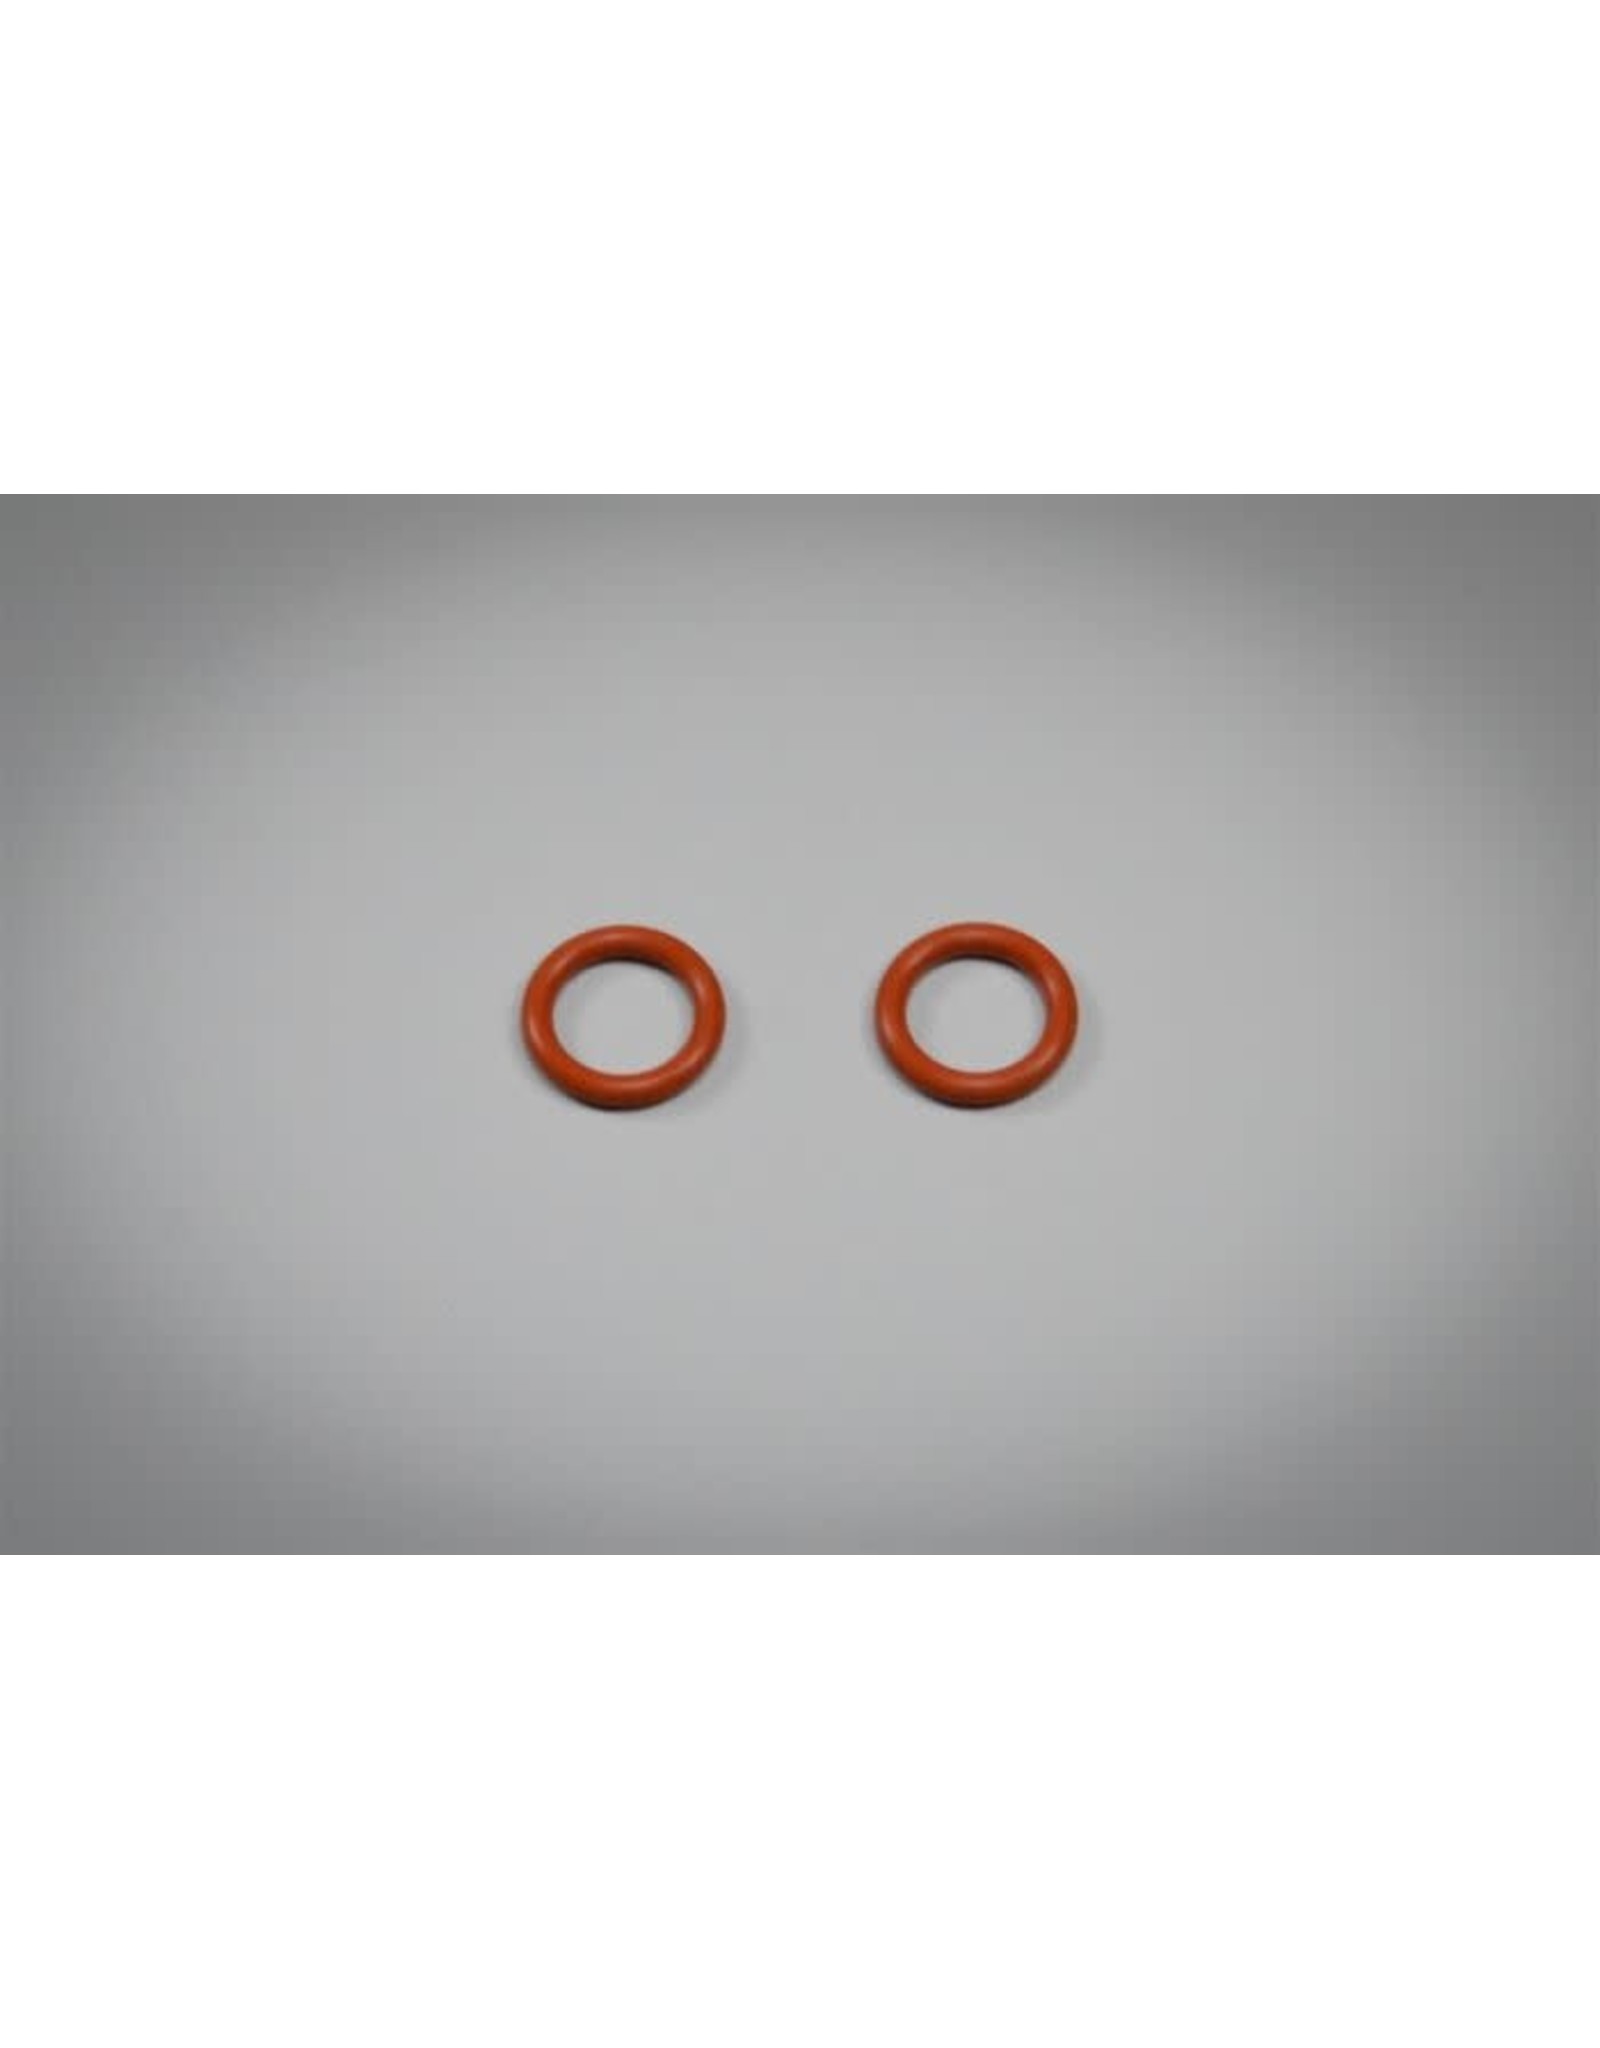 Blichmann O Ring Boil Coil Replacement 2 ct